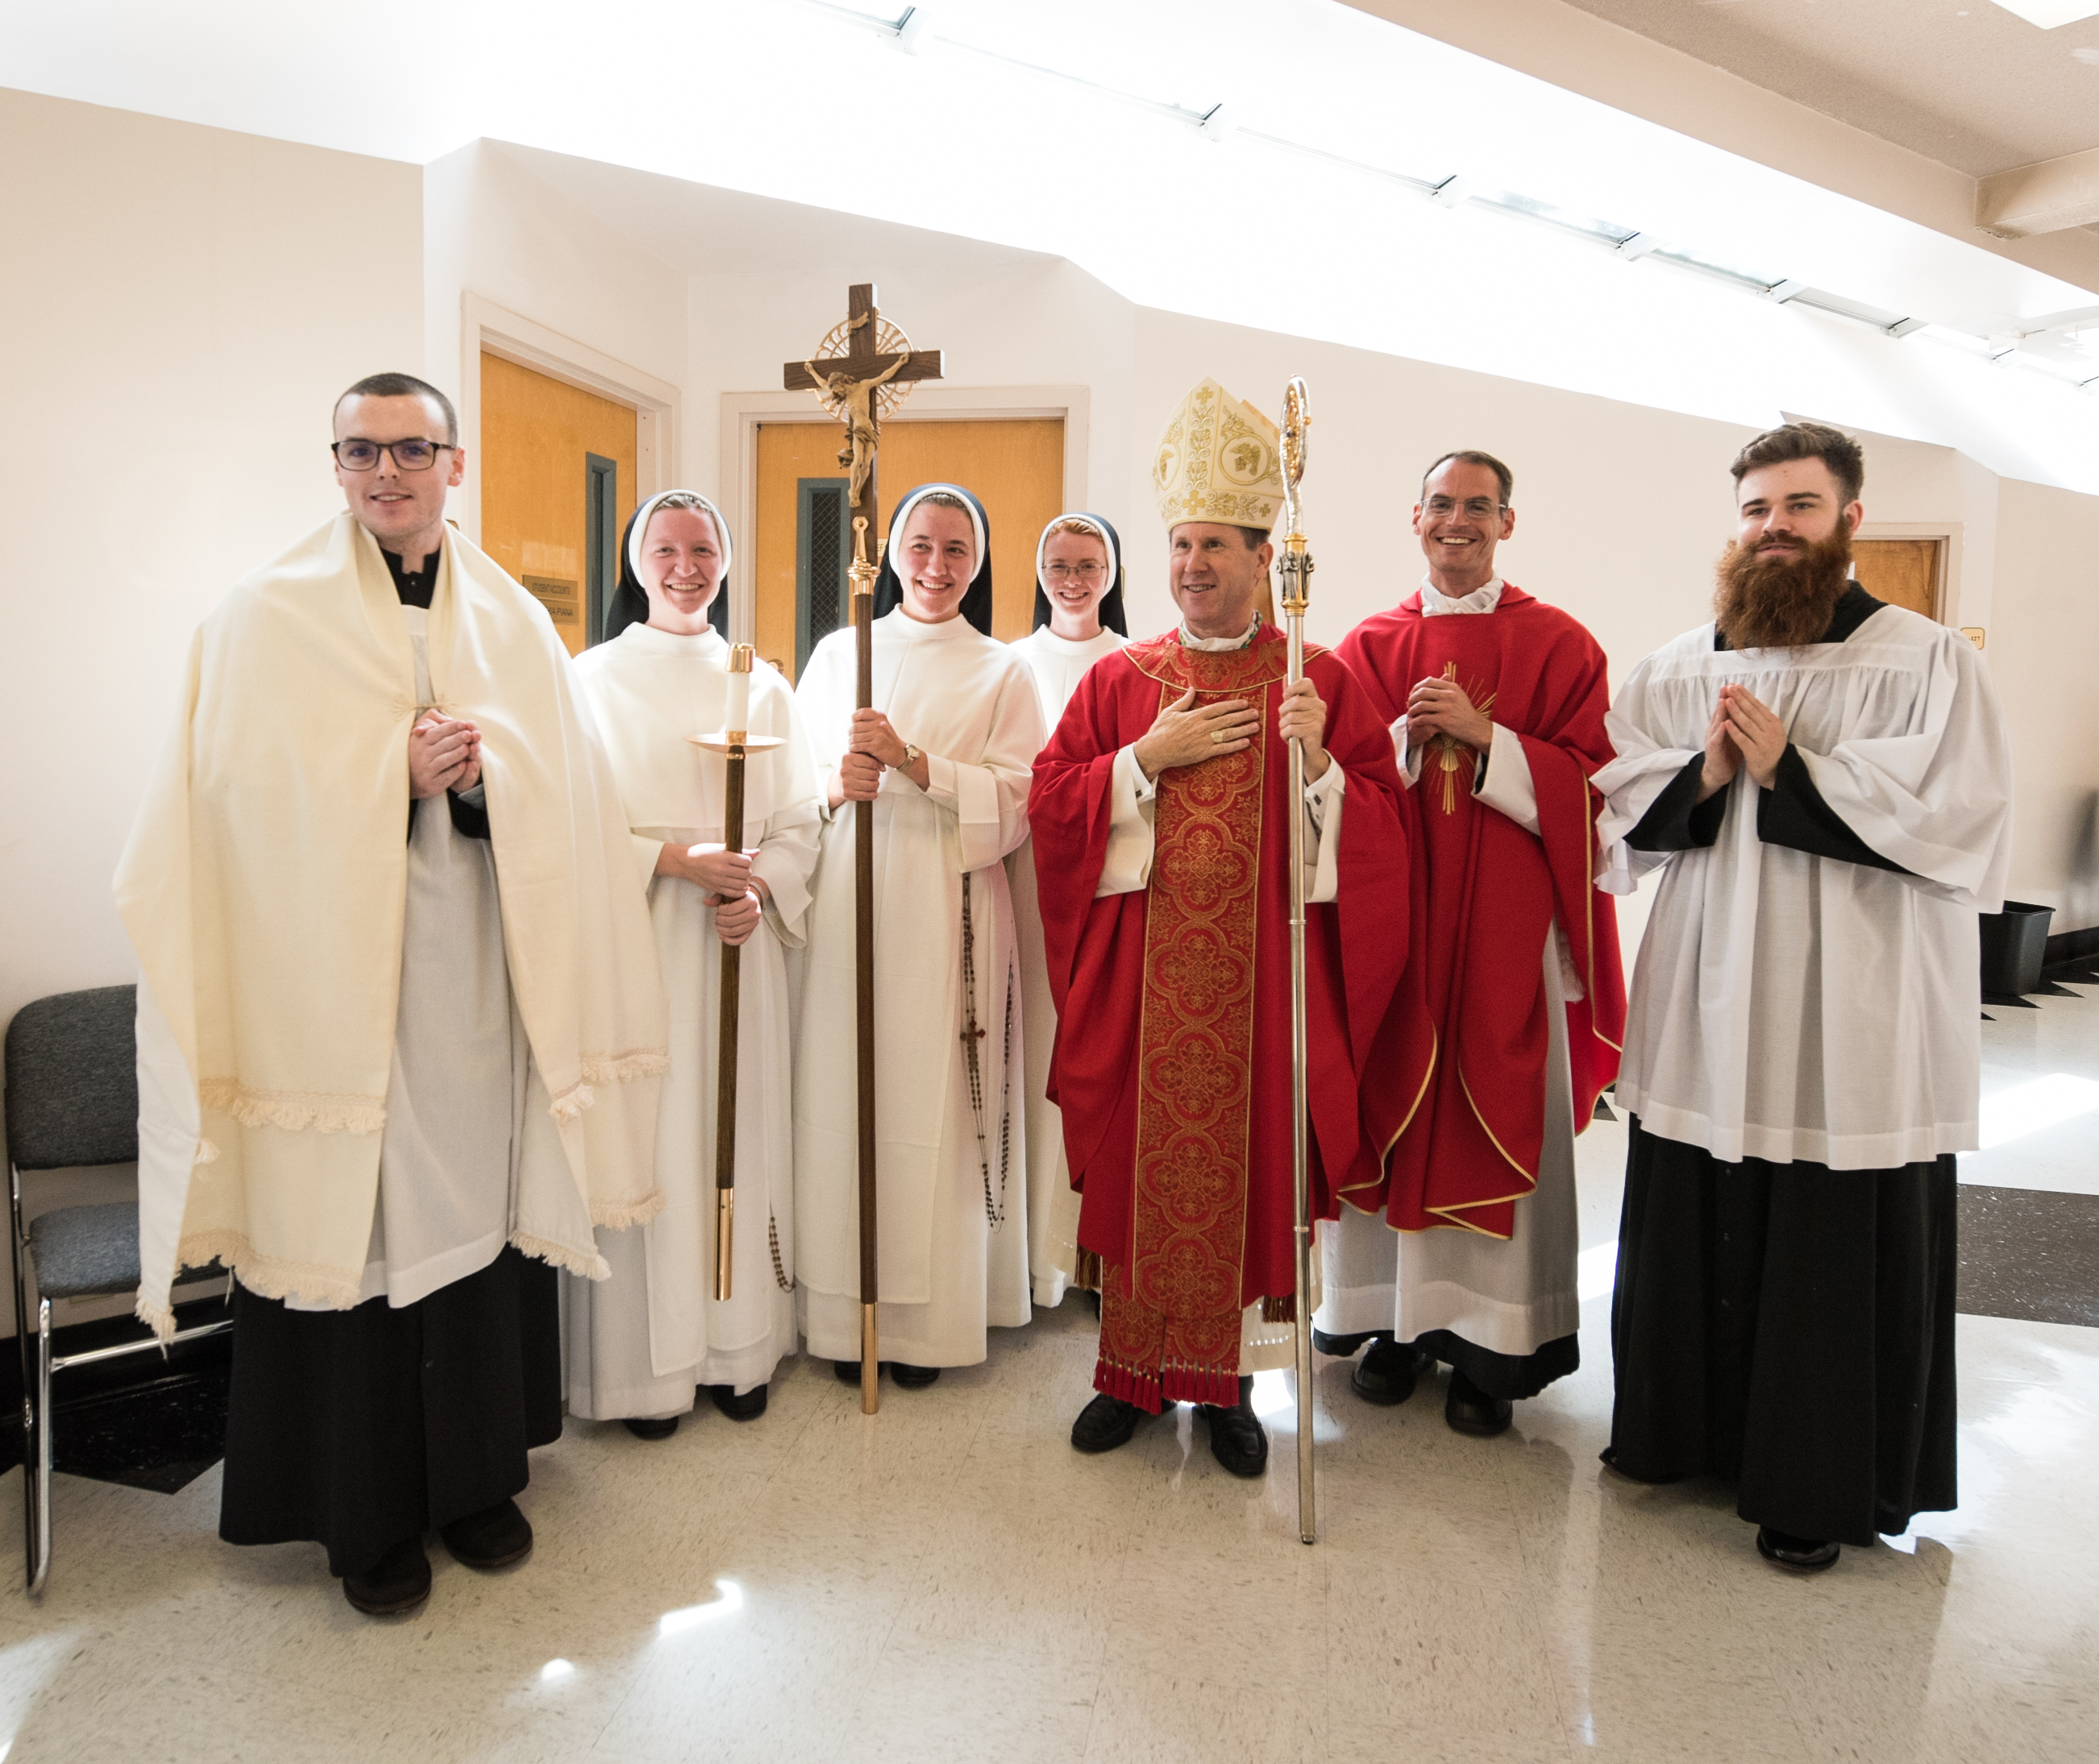 Most Rev. J. Mark Spalding celebrated the Mass of the Holy Spirit at Aquinas College August 28. Fr. Mark Chrismer, right, and Fr. Gervan Menezes (not pictured) with students of Aquinas College. Photo by Sr. Mary Justin Haltom, O.P.